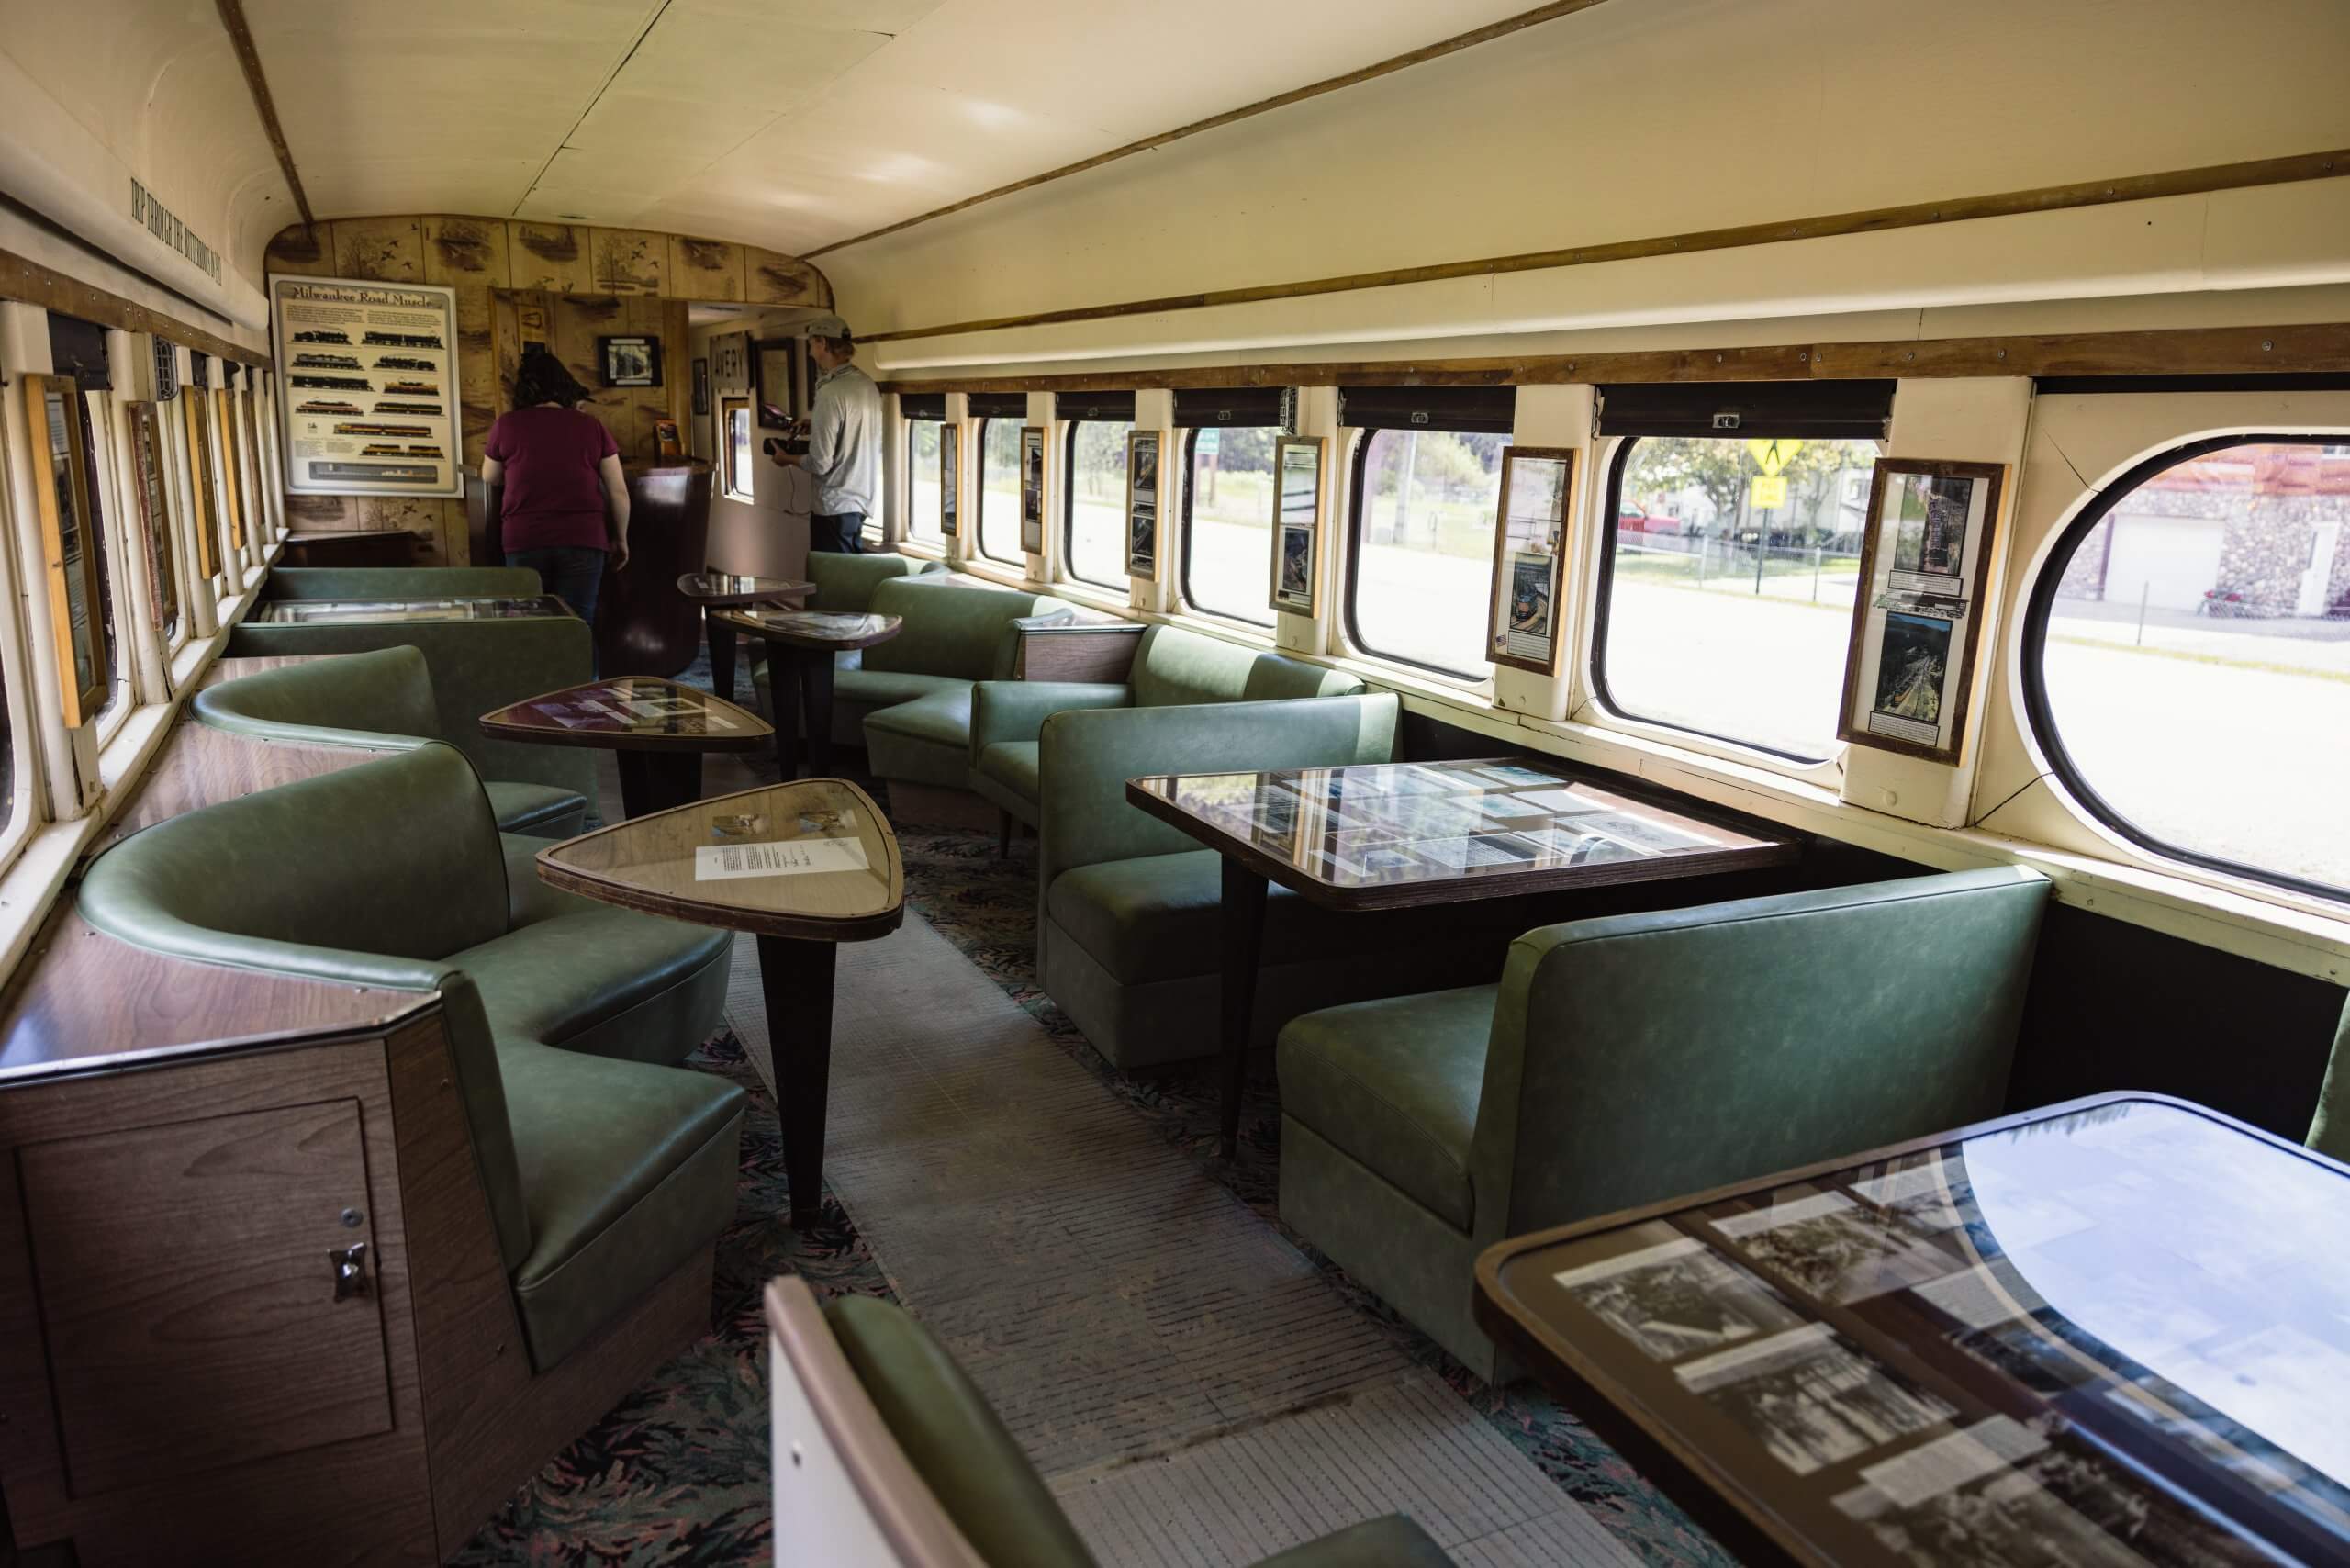 Interior of a train carriage at the Avery Museum.